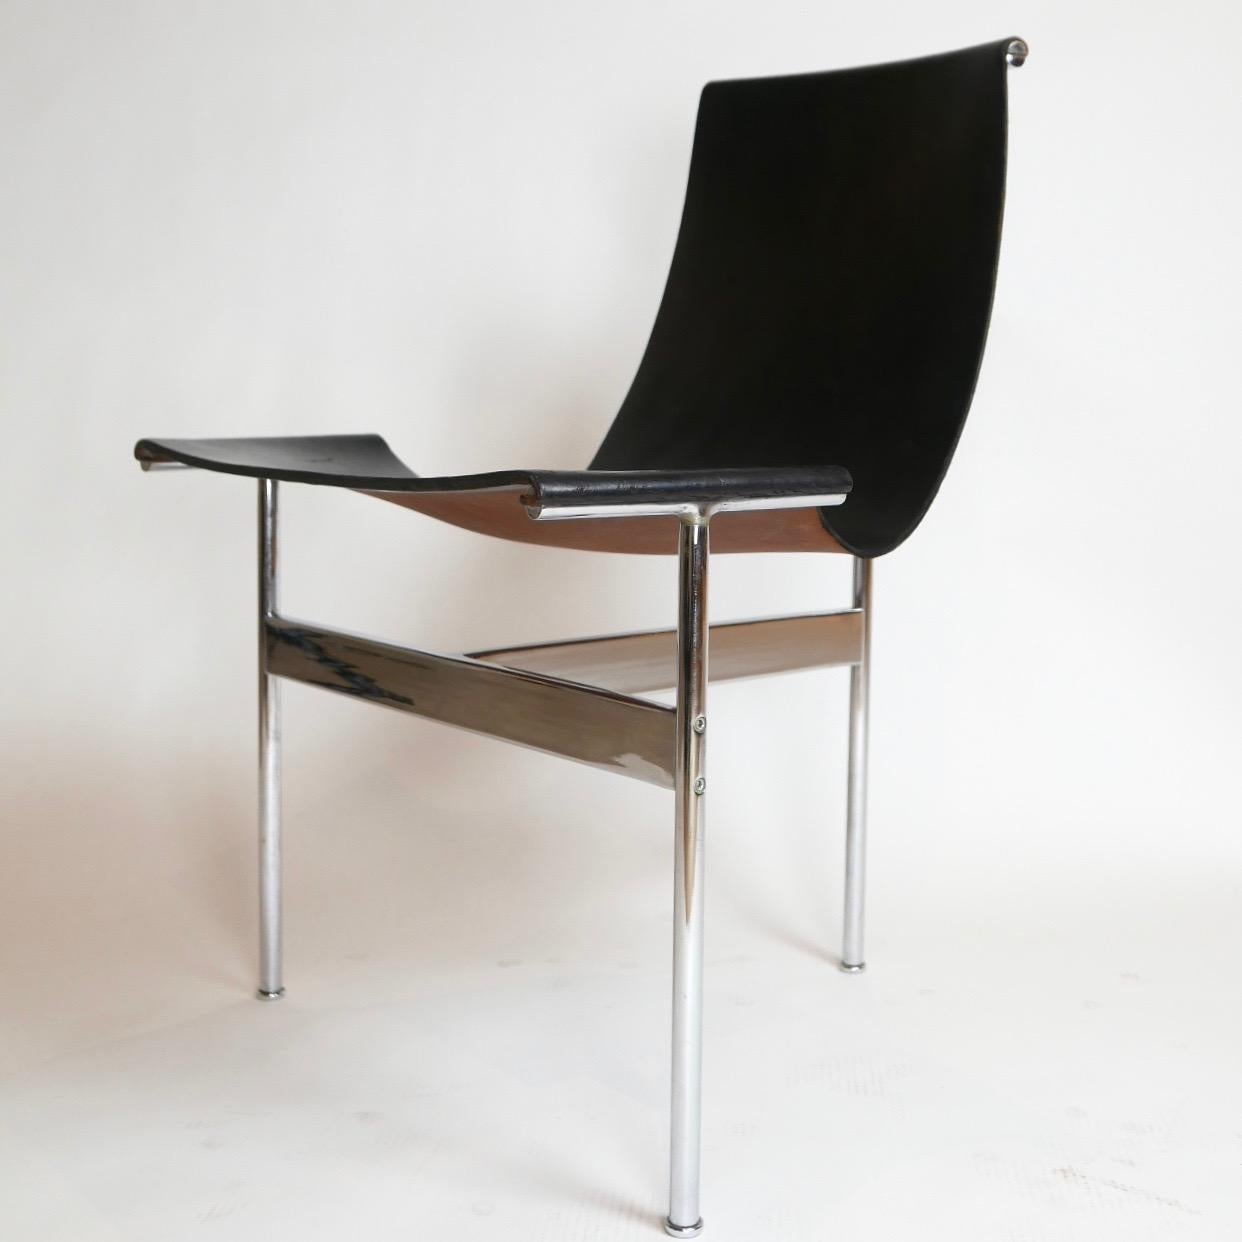 Fantastic set of excellent vintage 1960s T-chairs in black leather with chrome frames. William Katavolos in collaboration with Douglas Kelley & Ross Littell designed the iconic leather sling T chair model 3LC in 1952 as part of Laverne's Sculptural